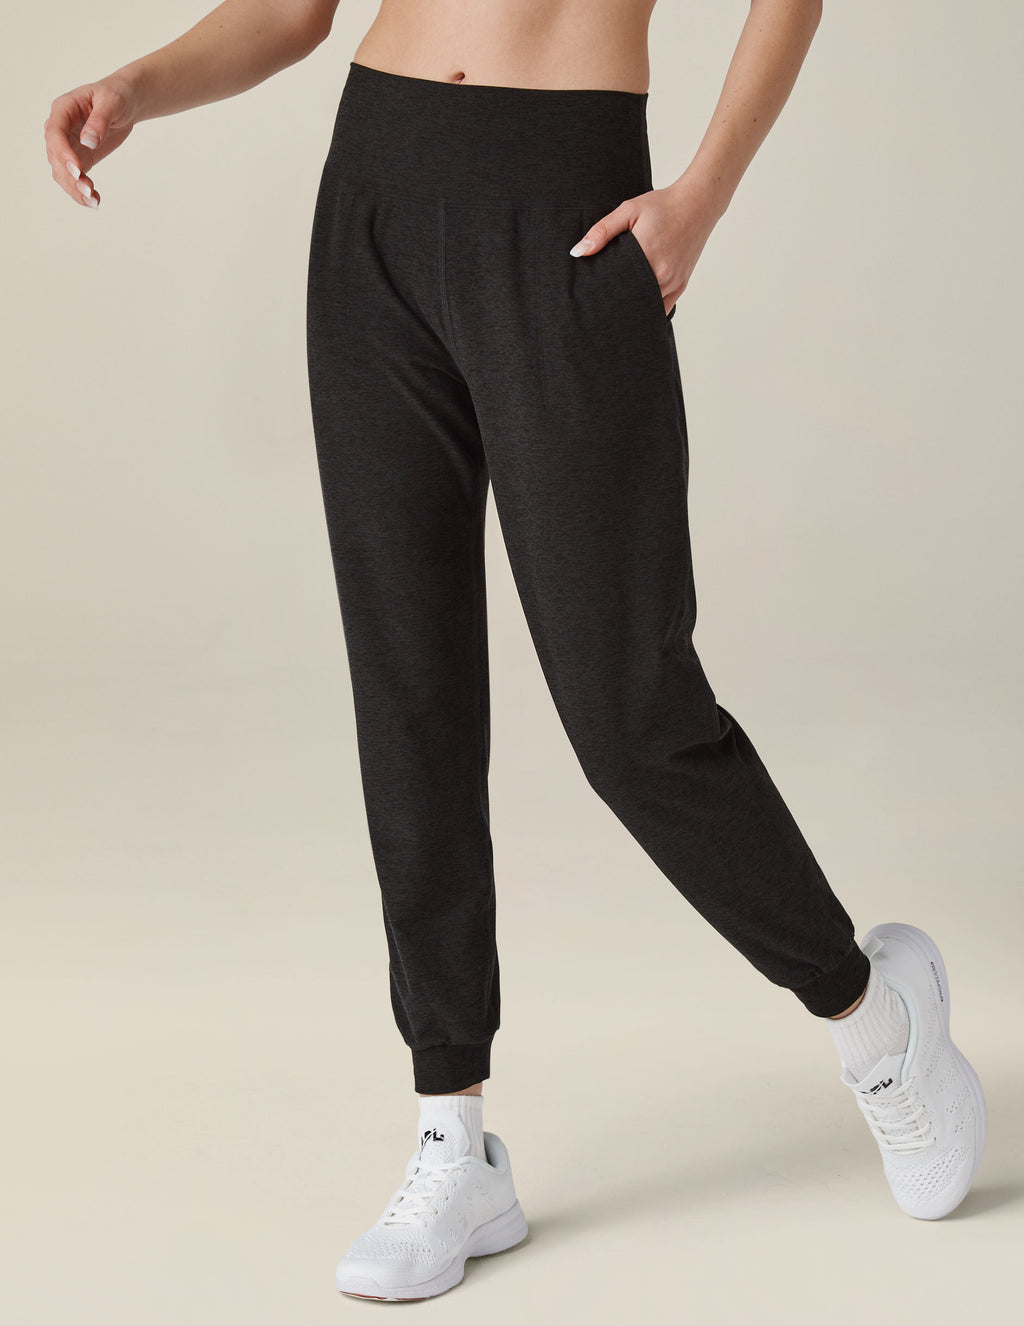 Womens High Waist Jogging Beyond Yoga Joggers With Pocket, Hip Lift,  Elastic Fit, Drawstring Legs, And Sweatpants For Fitness And Casual Wear  From Victor_wong, $19.65